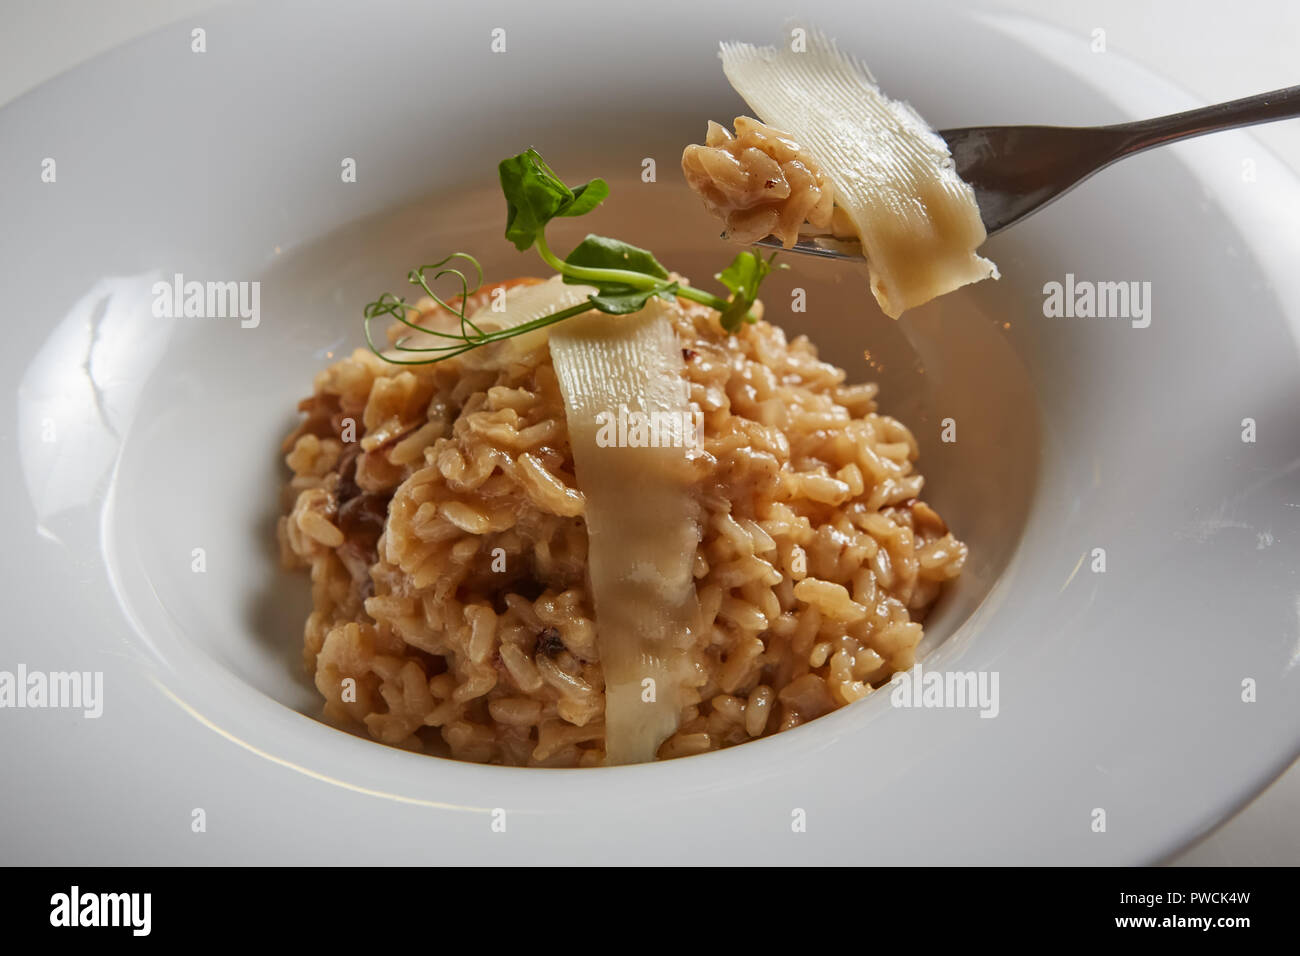 Italian dish risotto with wild white mushrooms and Parmesan cheese in a white plate. Stock Photo